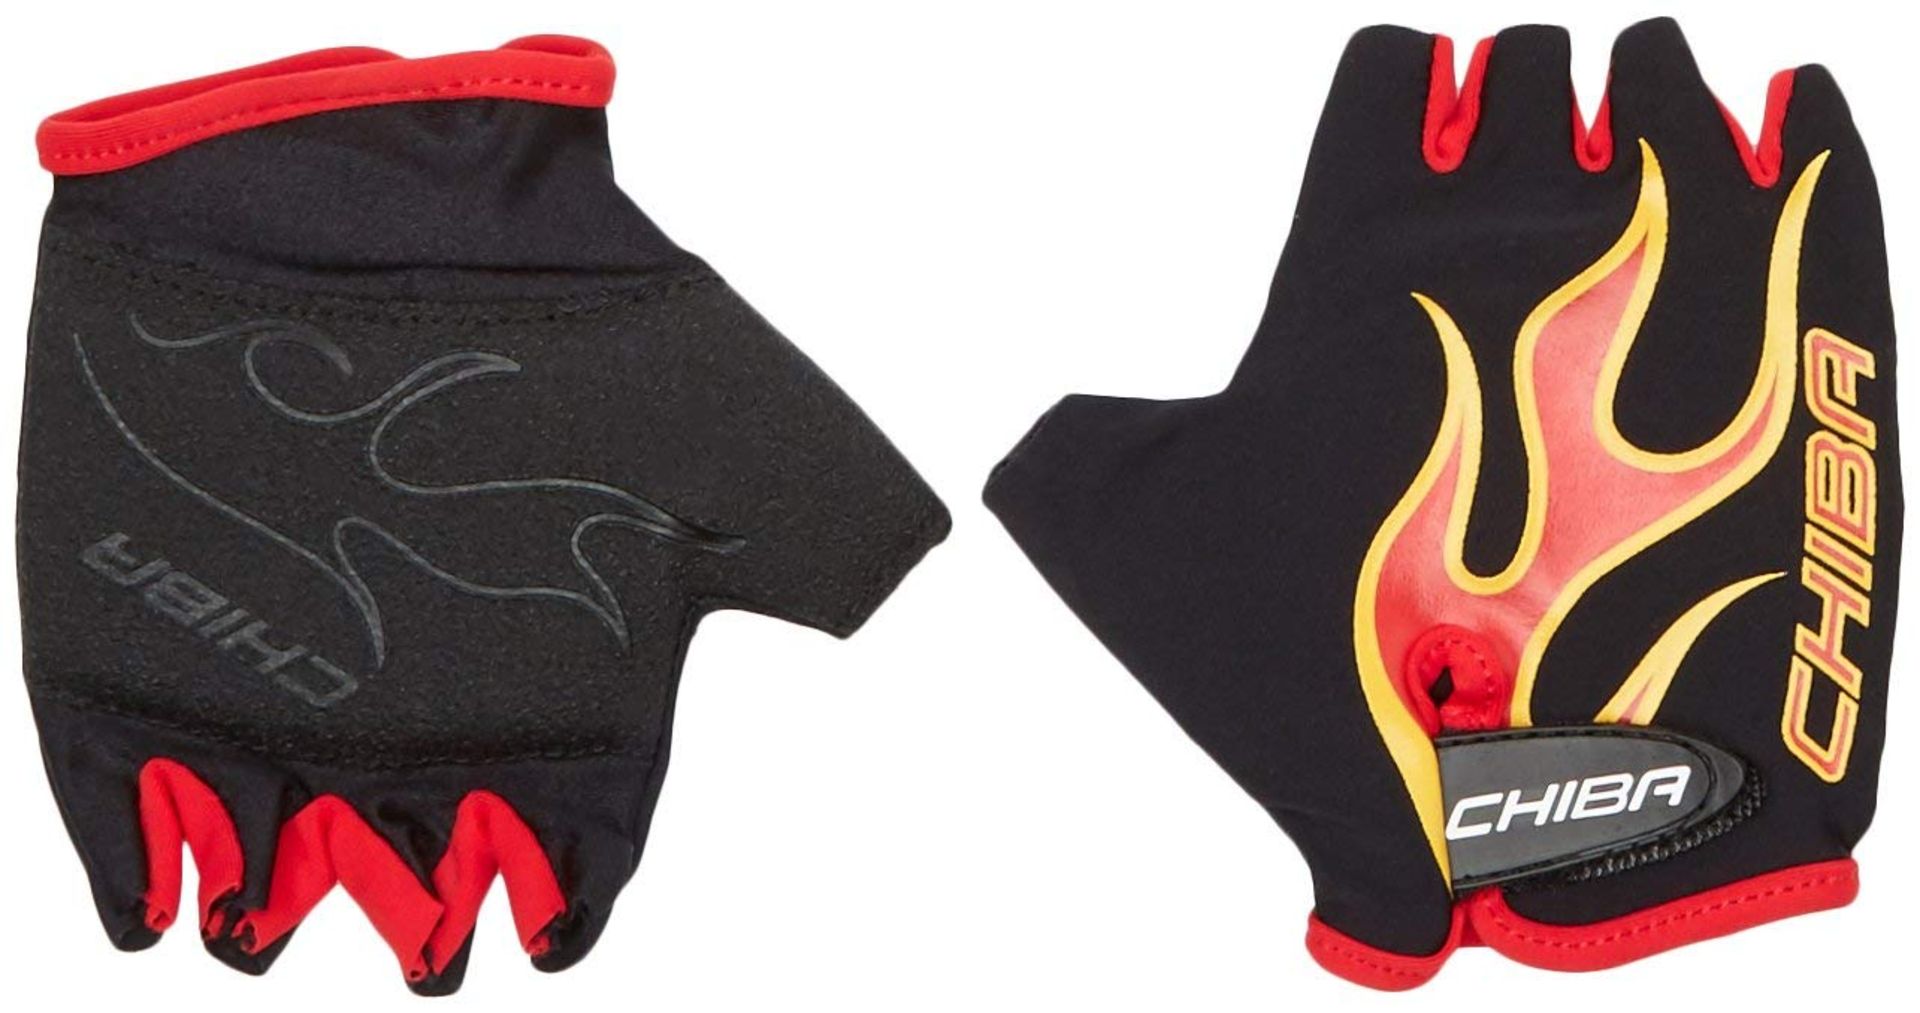 7 x Pairs of Boys & Girls Cycling Gloves | Total RRP £43.89 | See Description for Details - Image 3 of 4